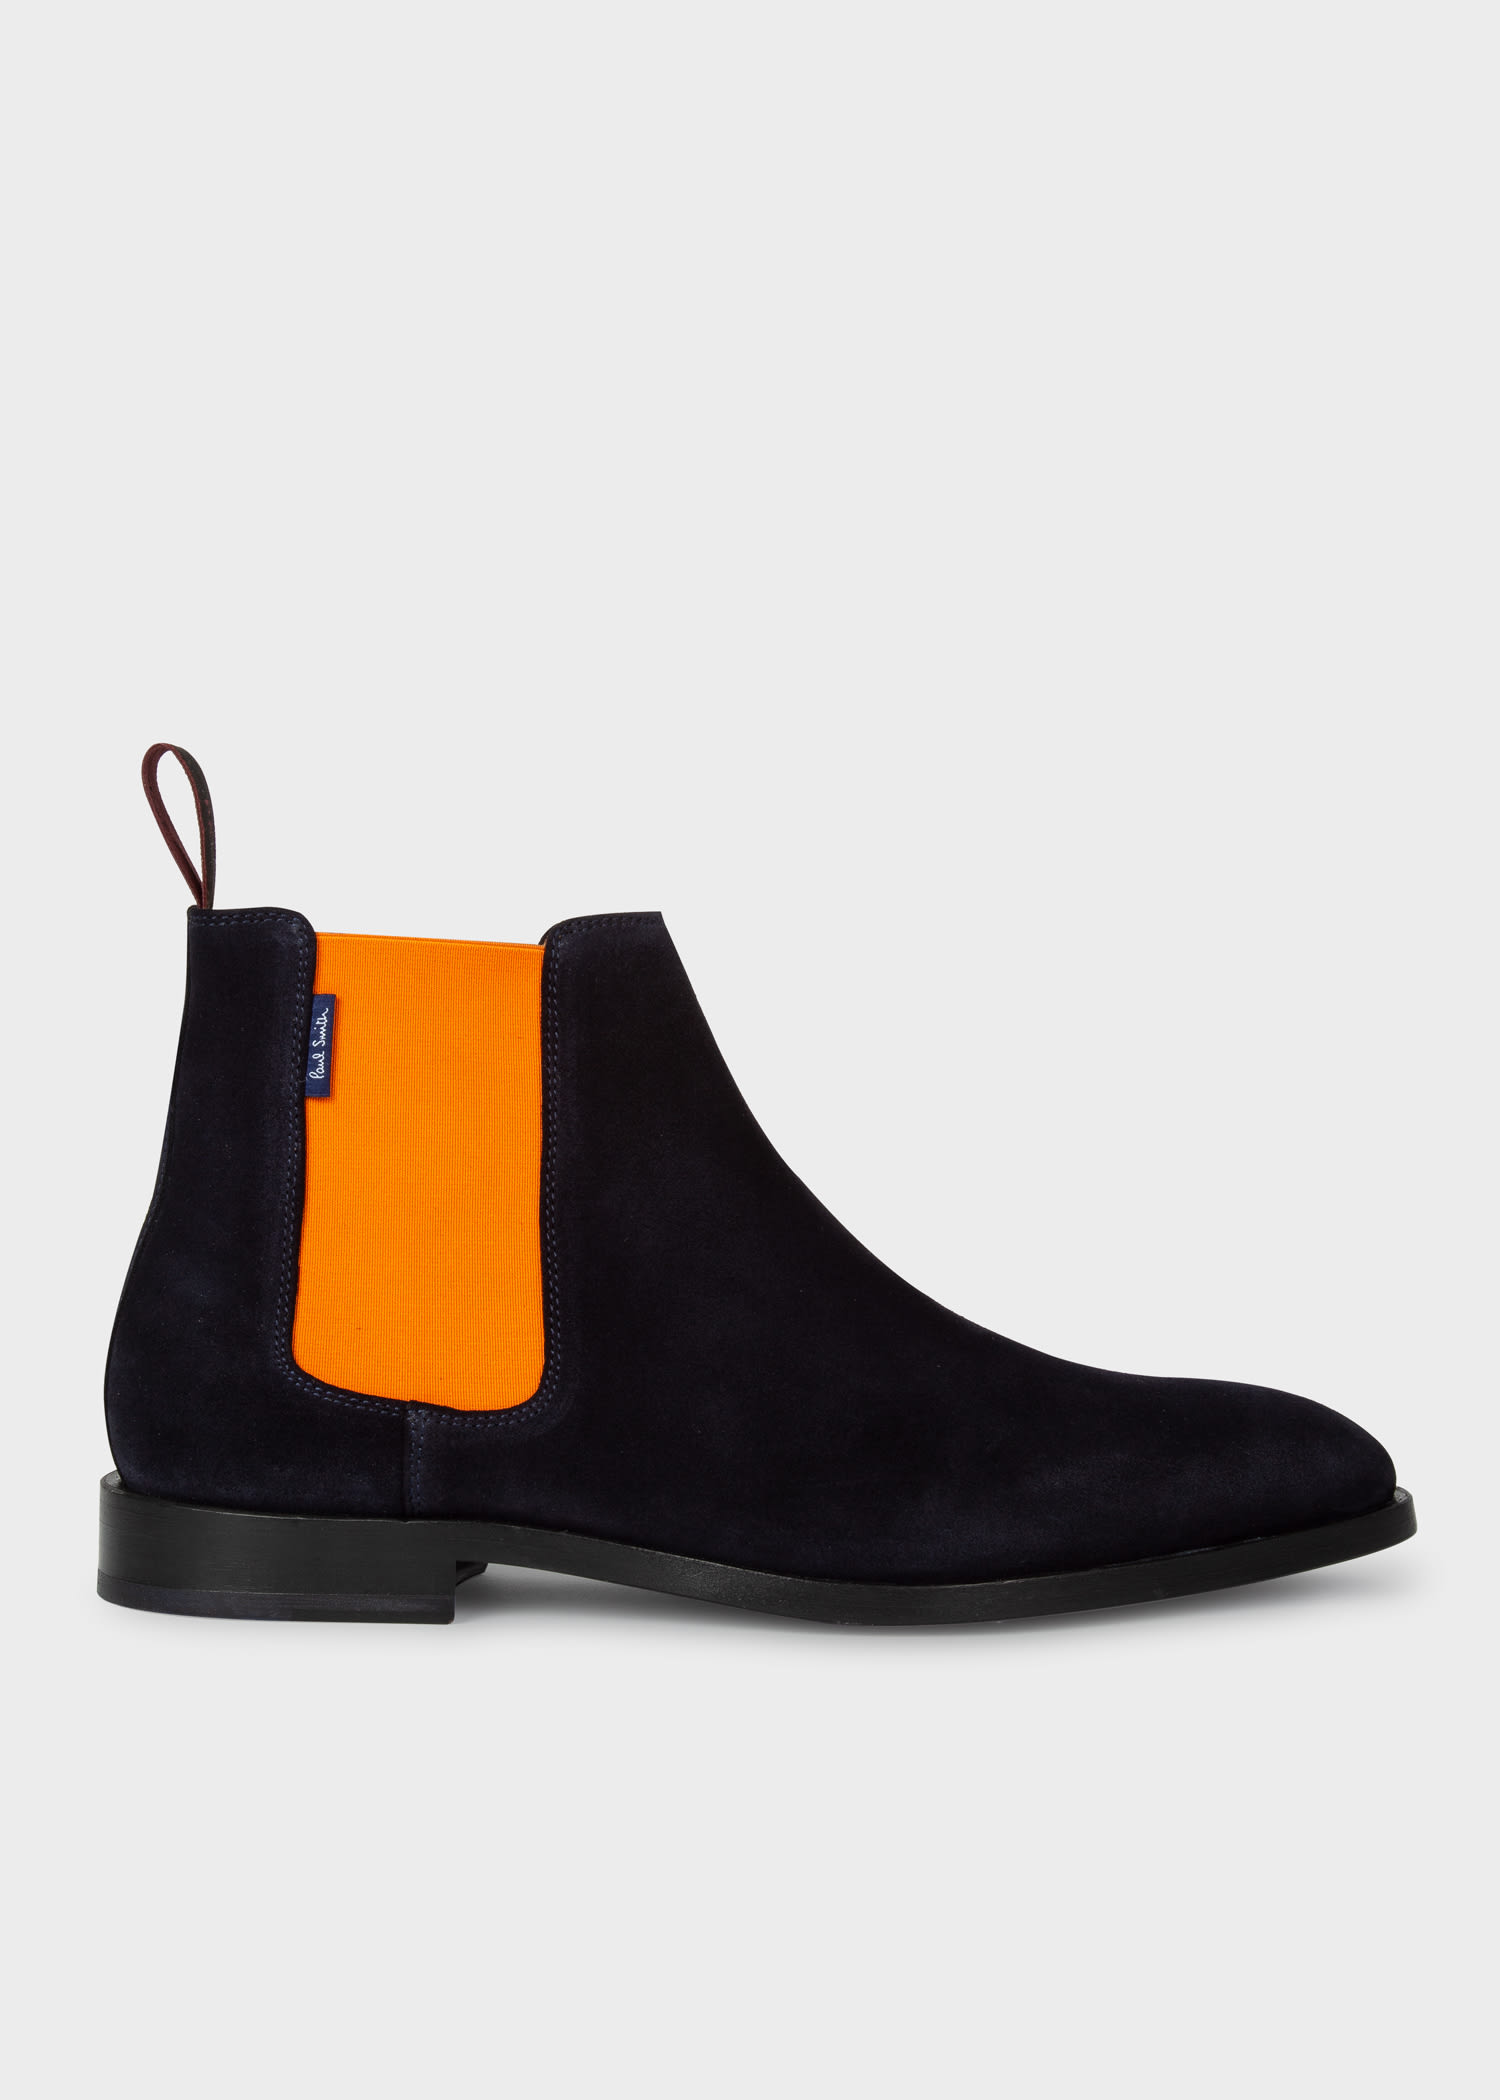 Men's Black Smooth Calf Leather 'Gerald' Chelsea Boots - Paul Smith